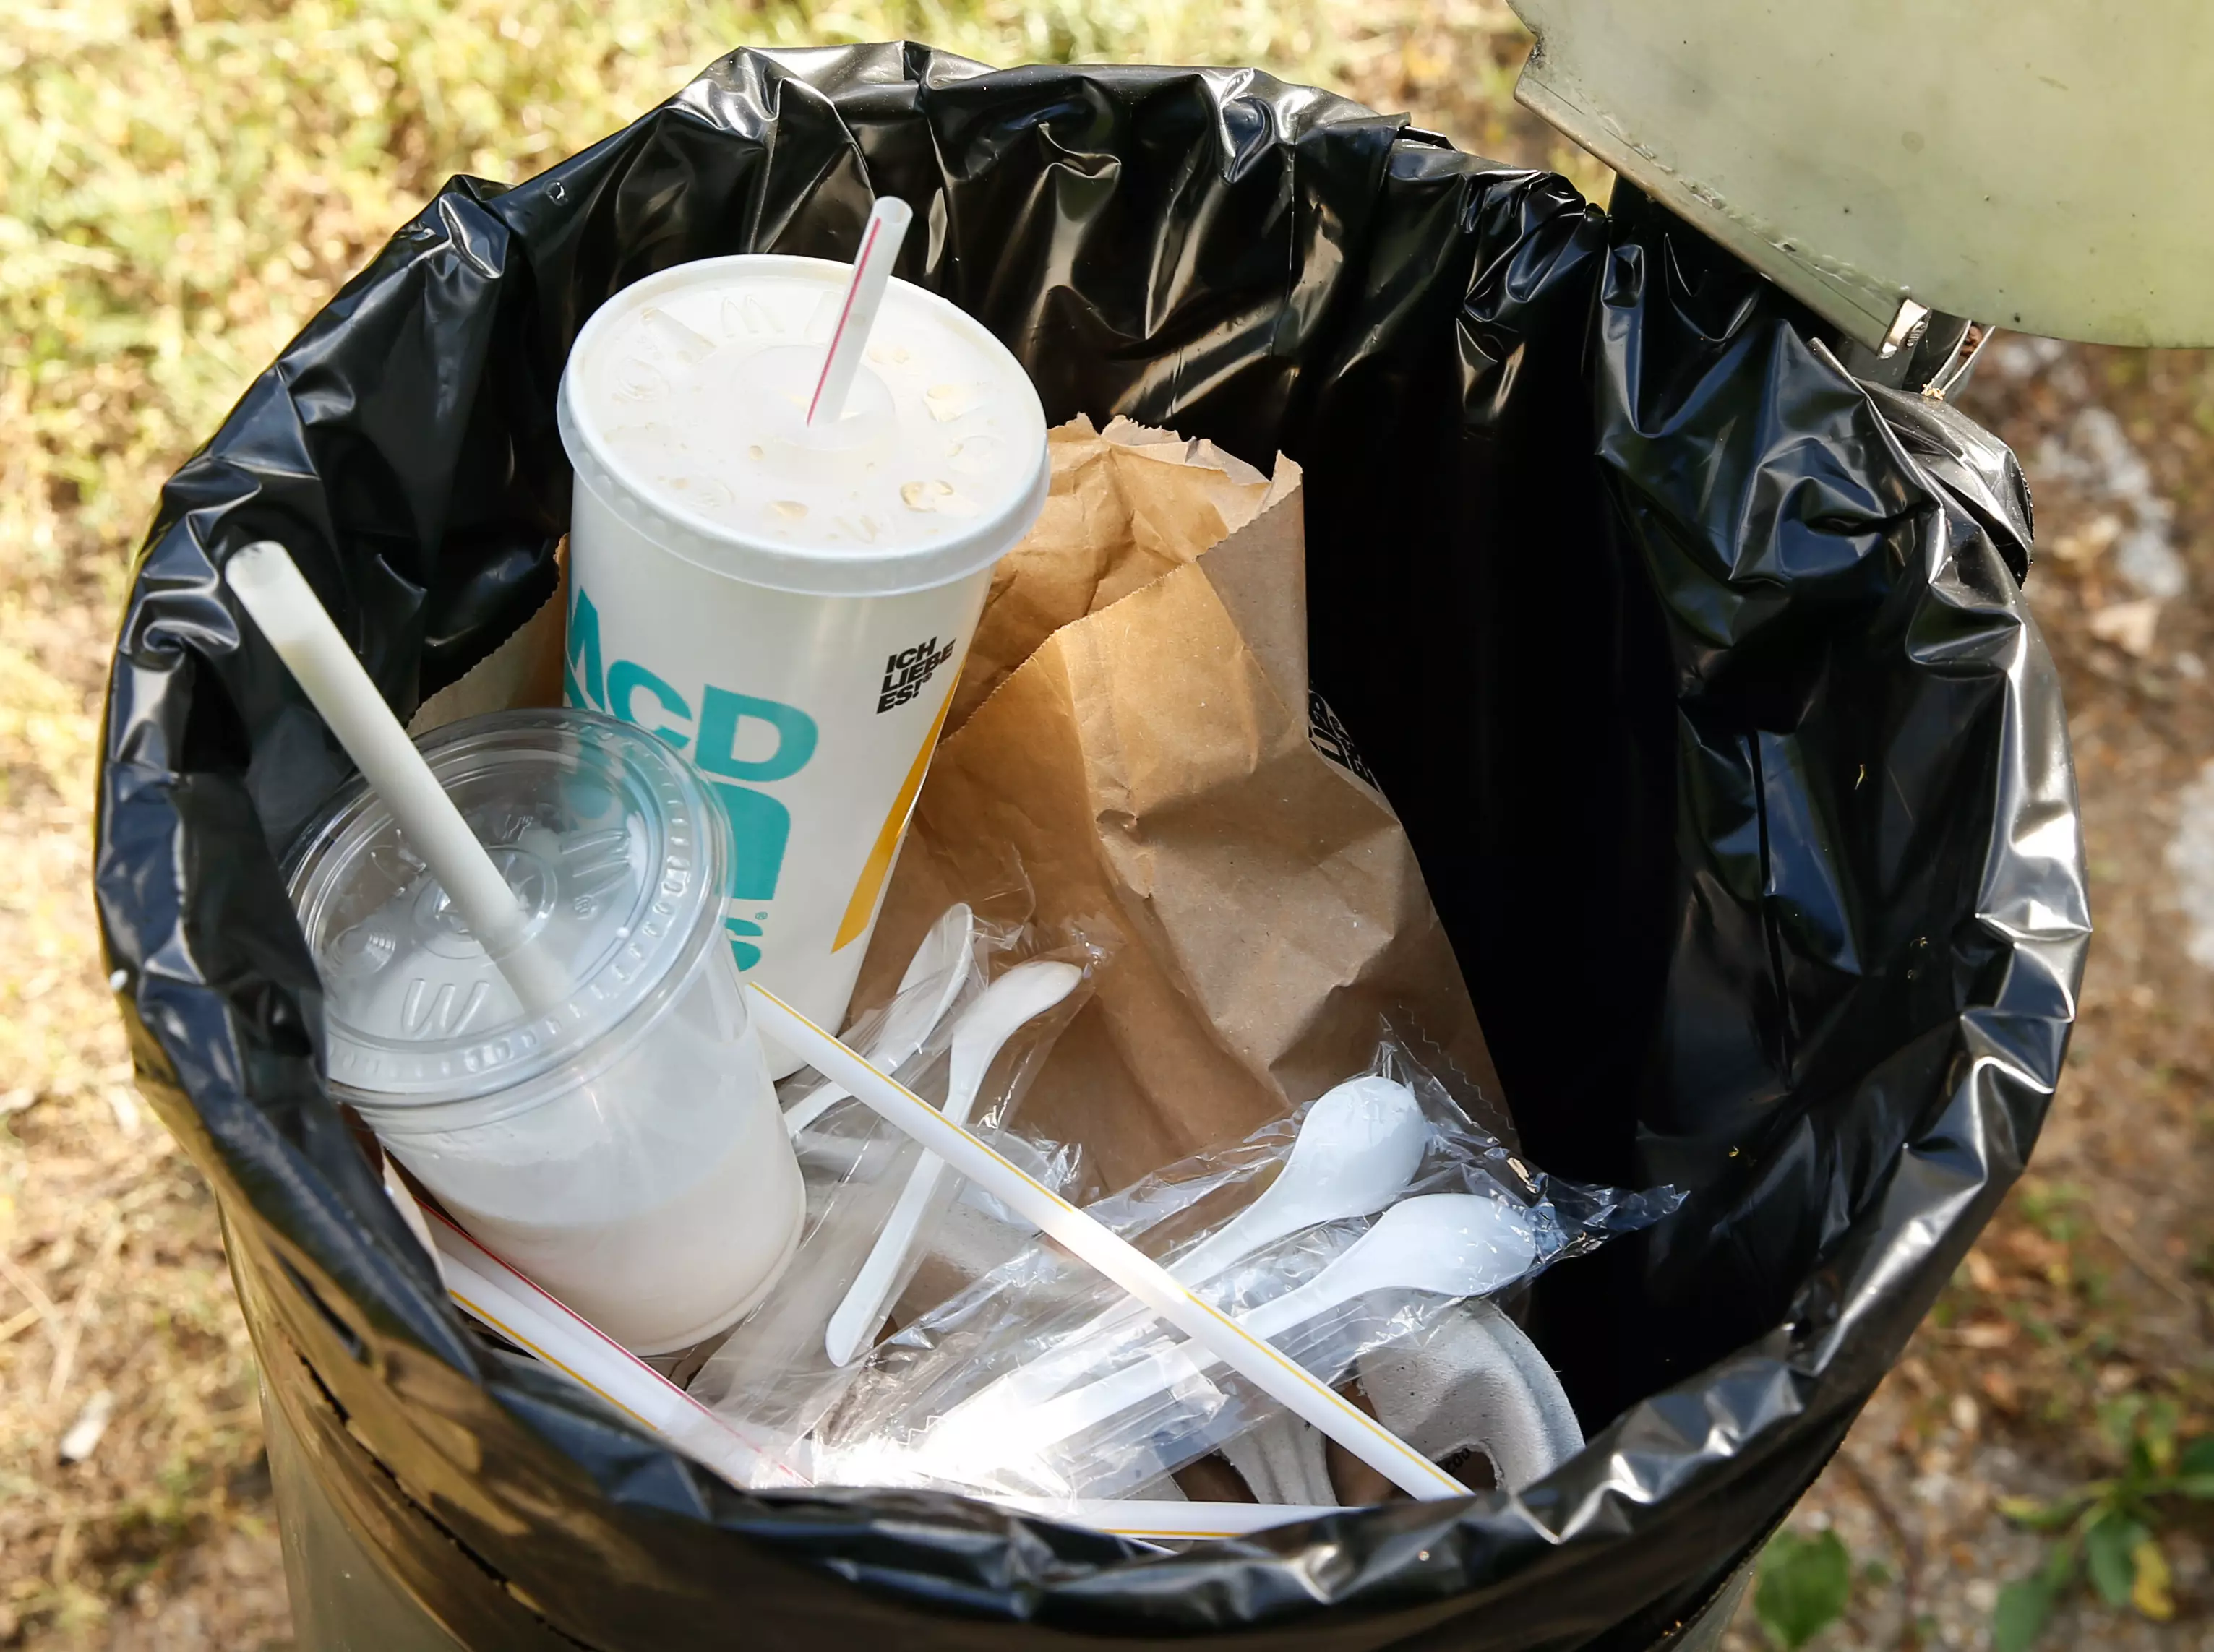 The memo revealed paper straws are thrown in the general waste.